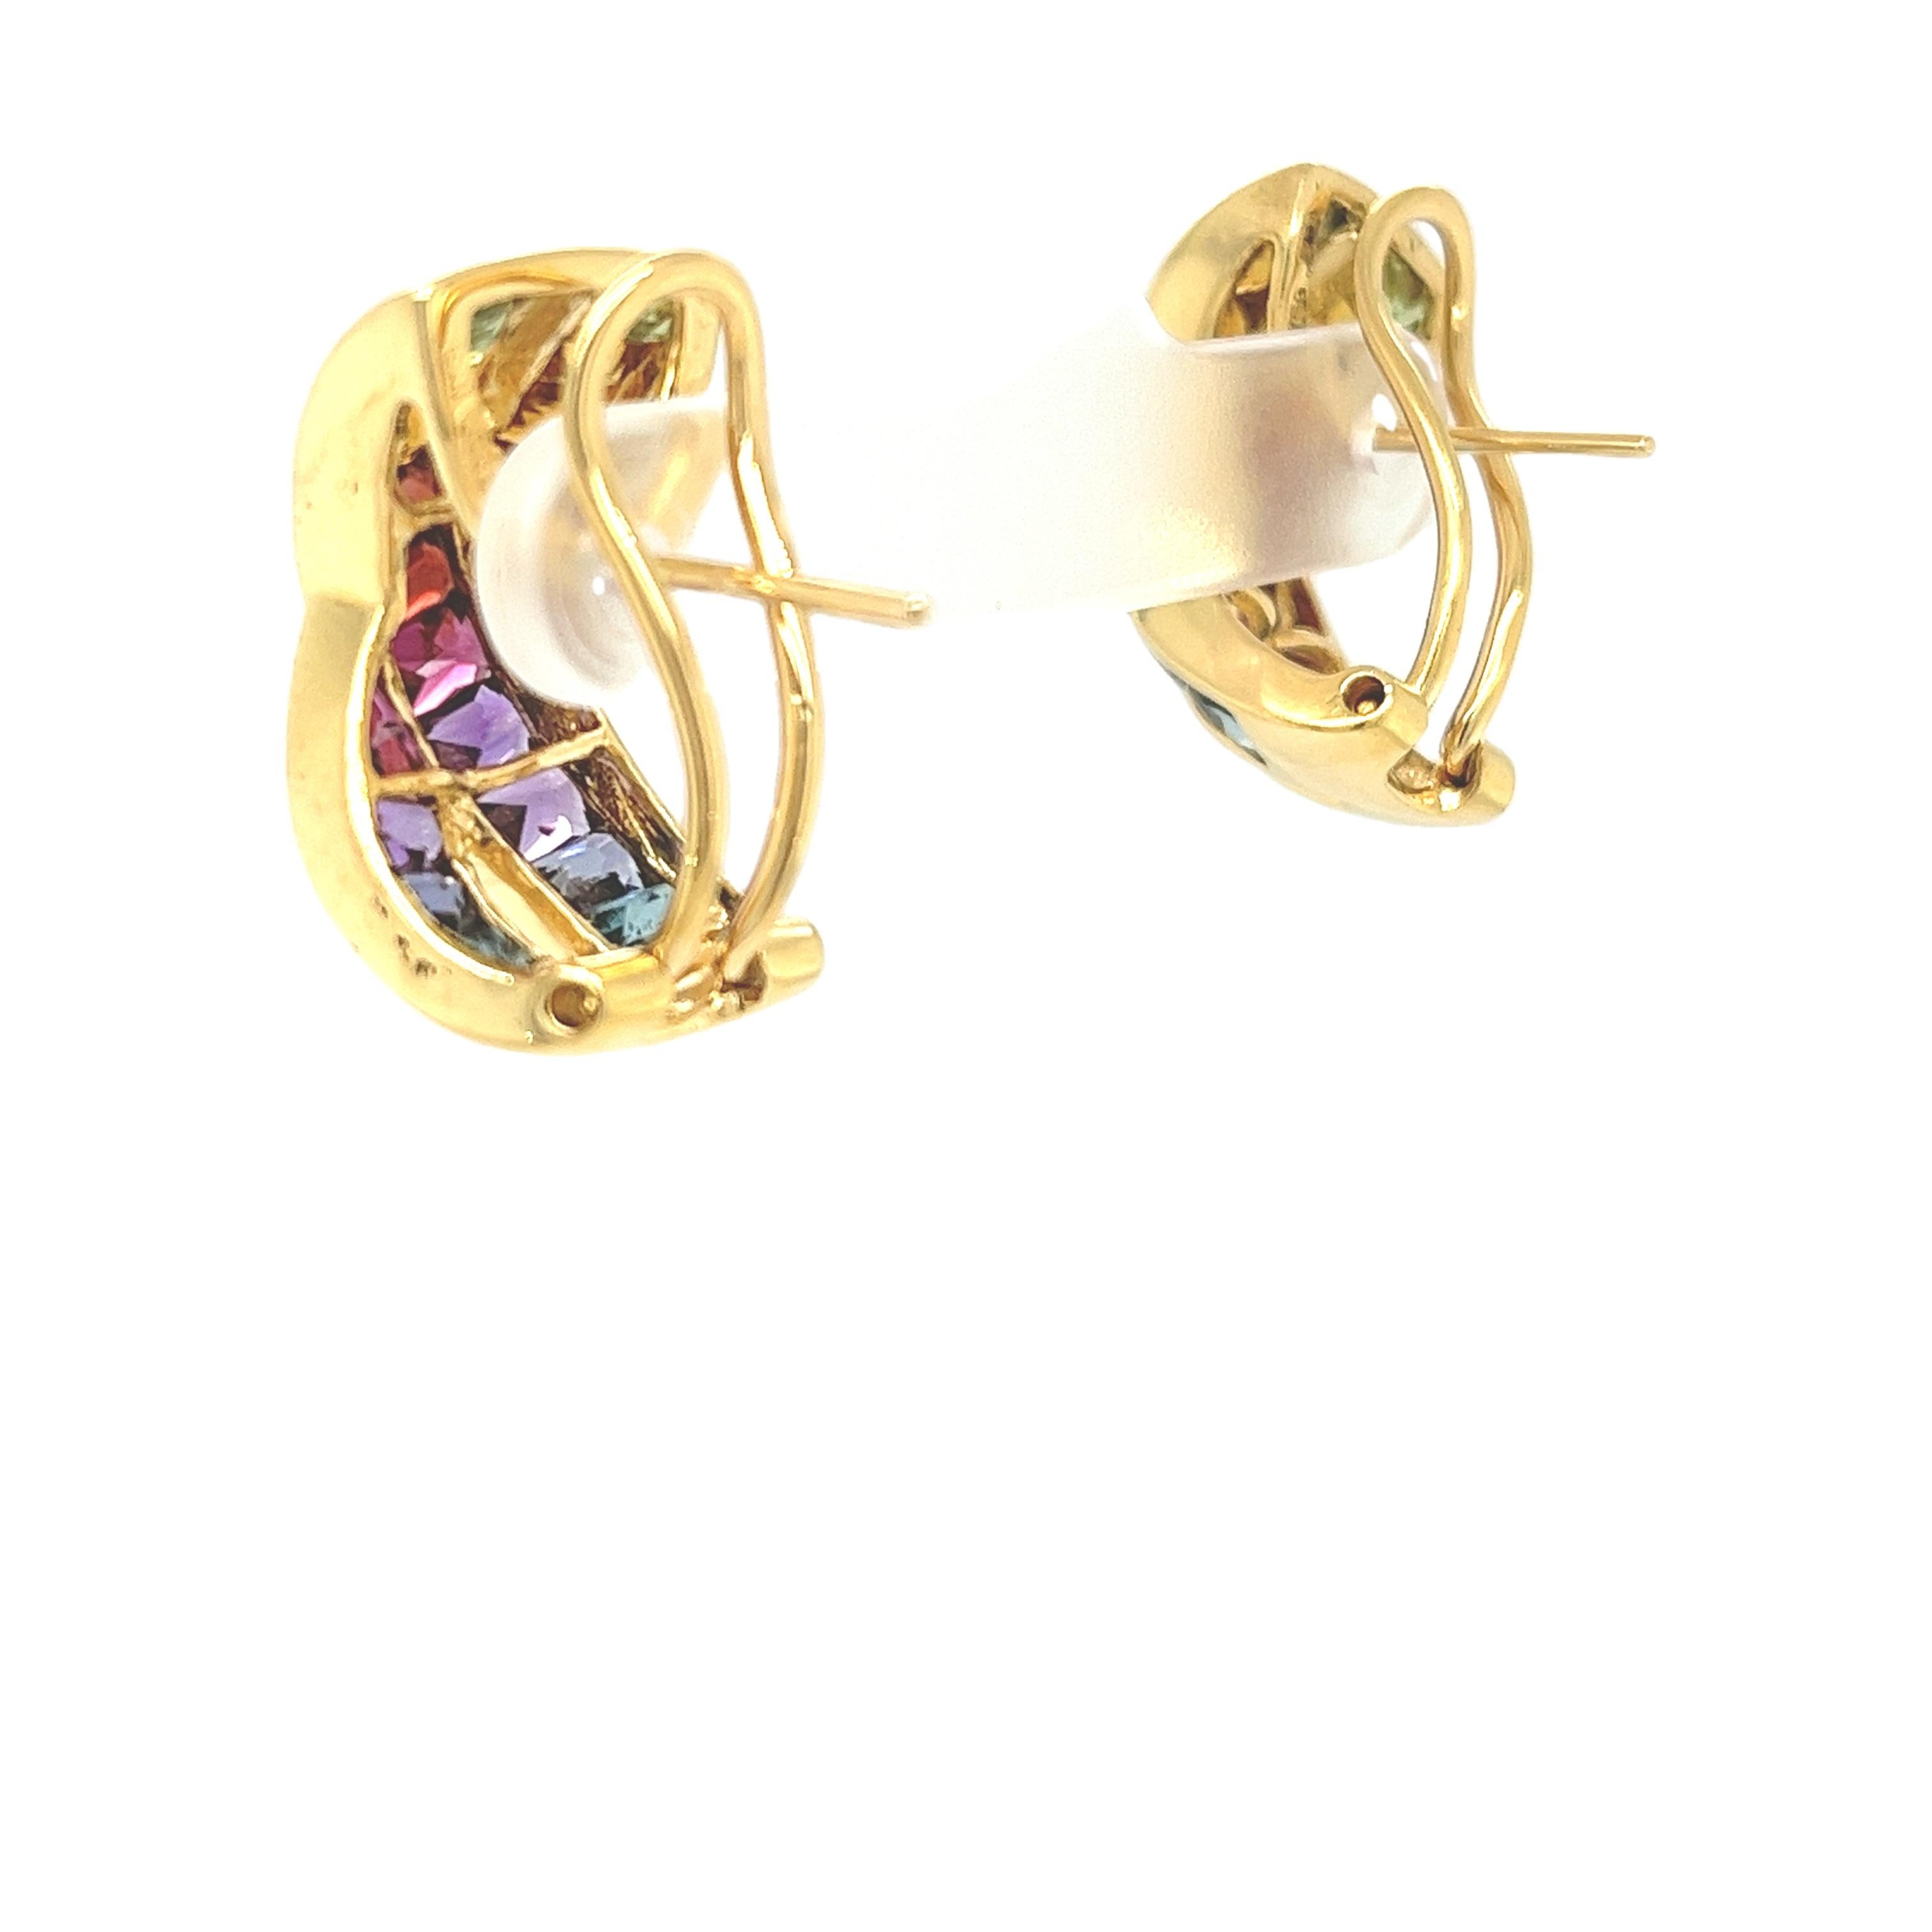 H. Stern 18ct Yellow Gold Rainbow Earrings Set With 36 Multicolour Sapphires 5